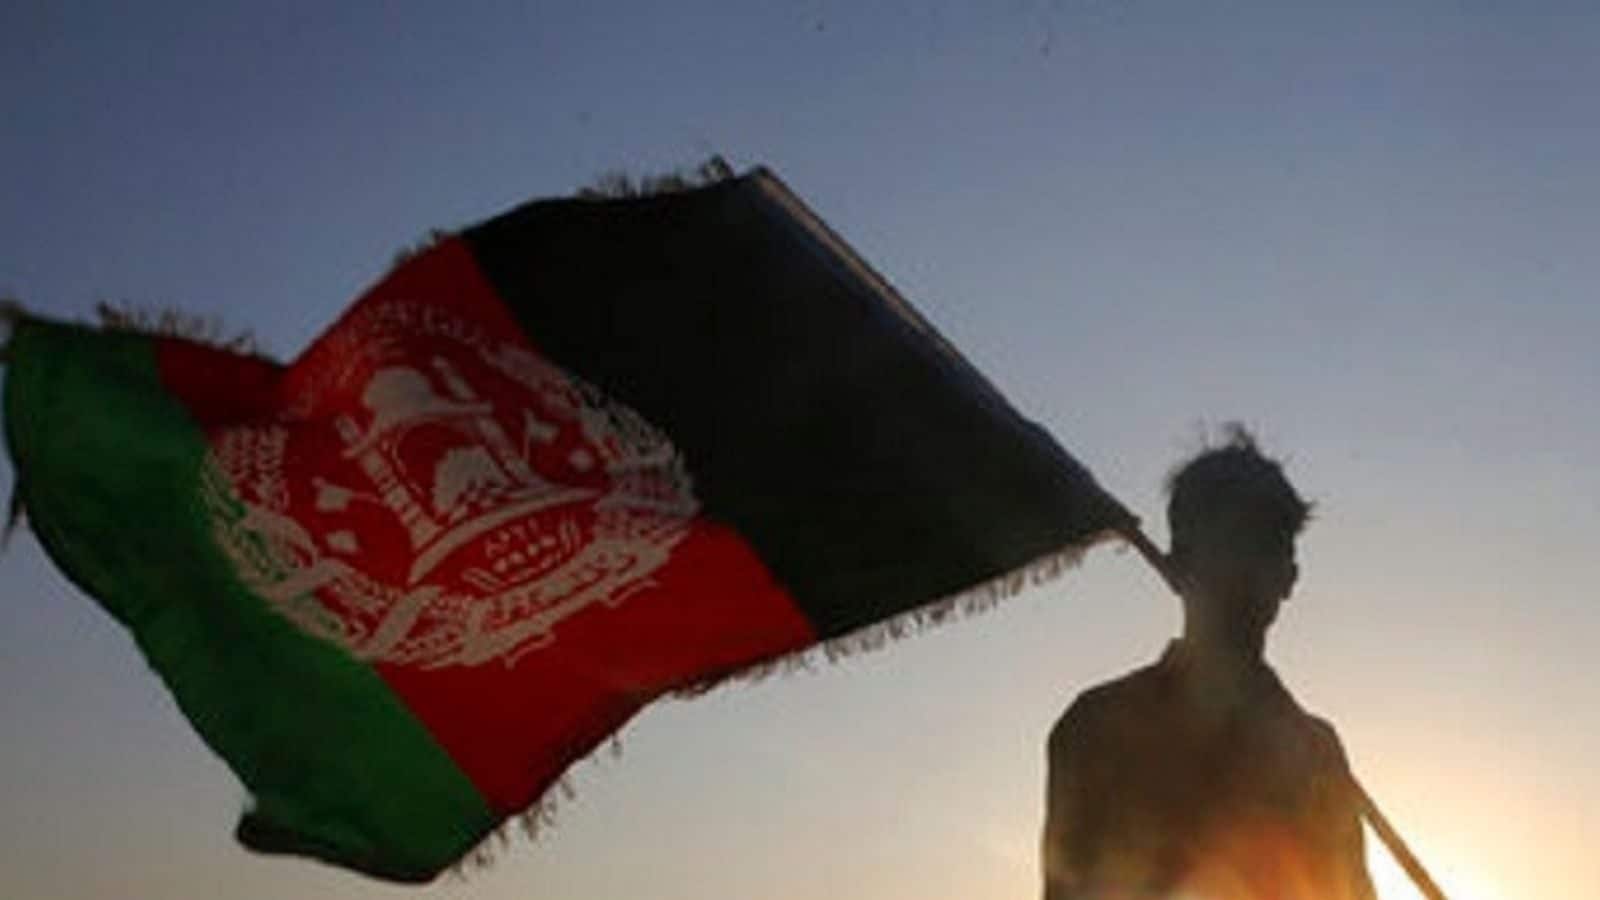 UN Says Evaluating Afghanistan Security Hourly, No Staff Evacuation